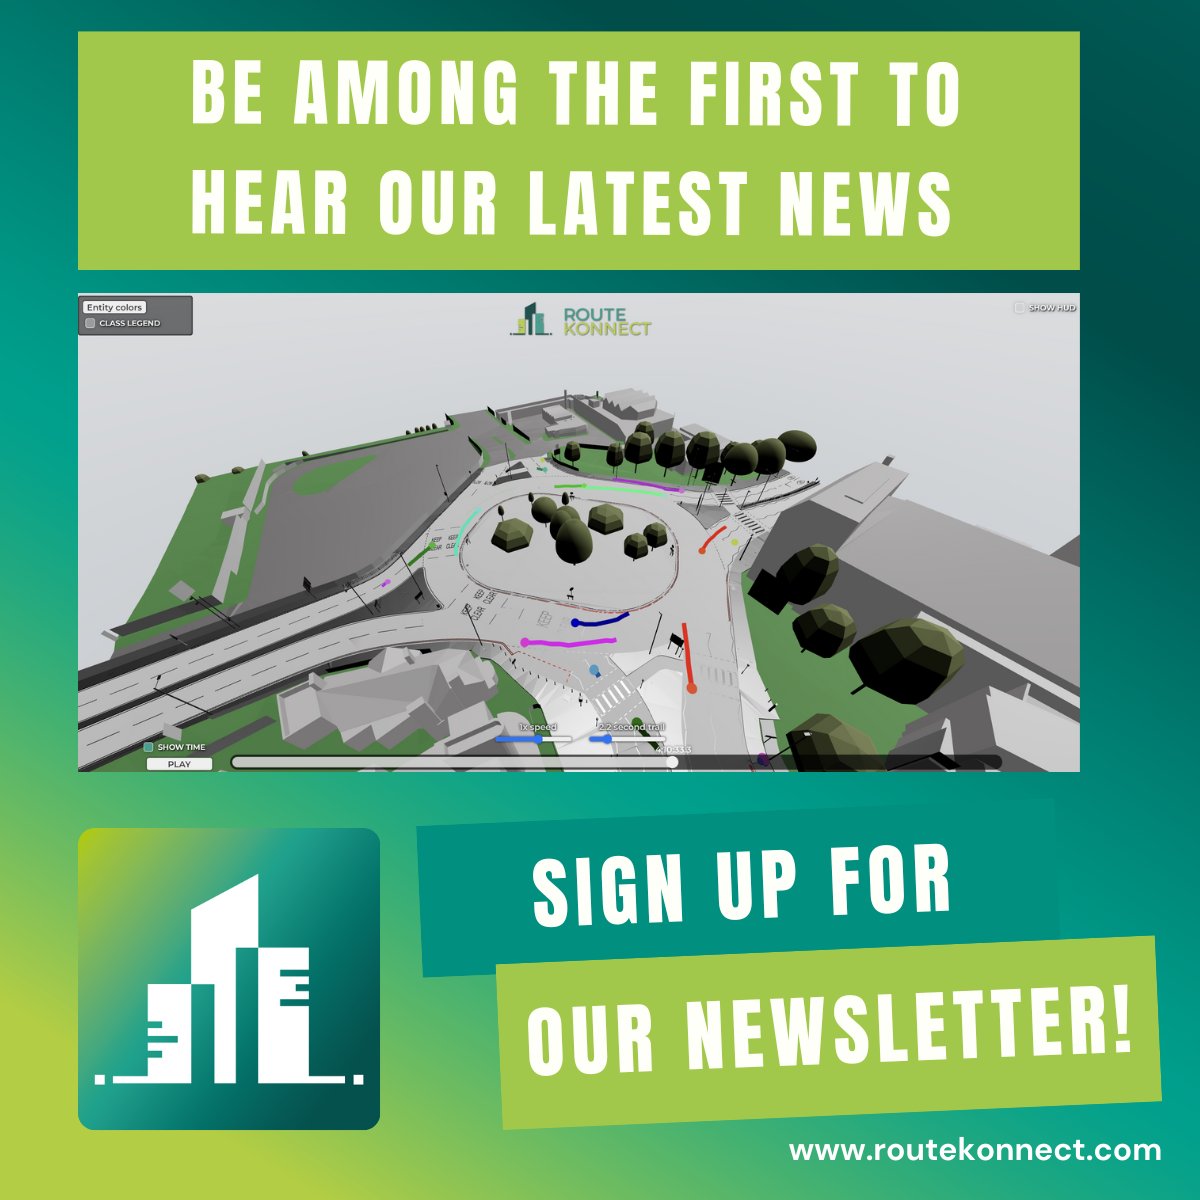 Are you looking to stay updated on the latest AI and mobility trends, insights, and news? Route Konnect is launching a brand new #newsletter, that will bring you the latest updates directly to your inbox. Sign up here to receive the first issue: go.routekonnect.com/3Nh05yf